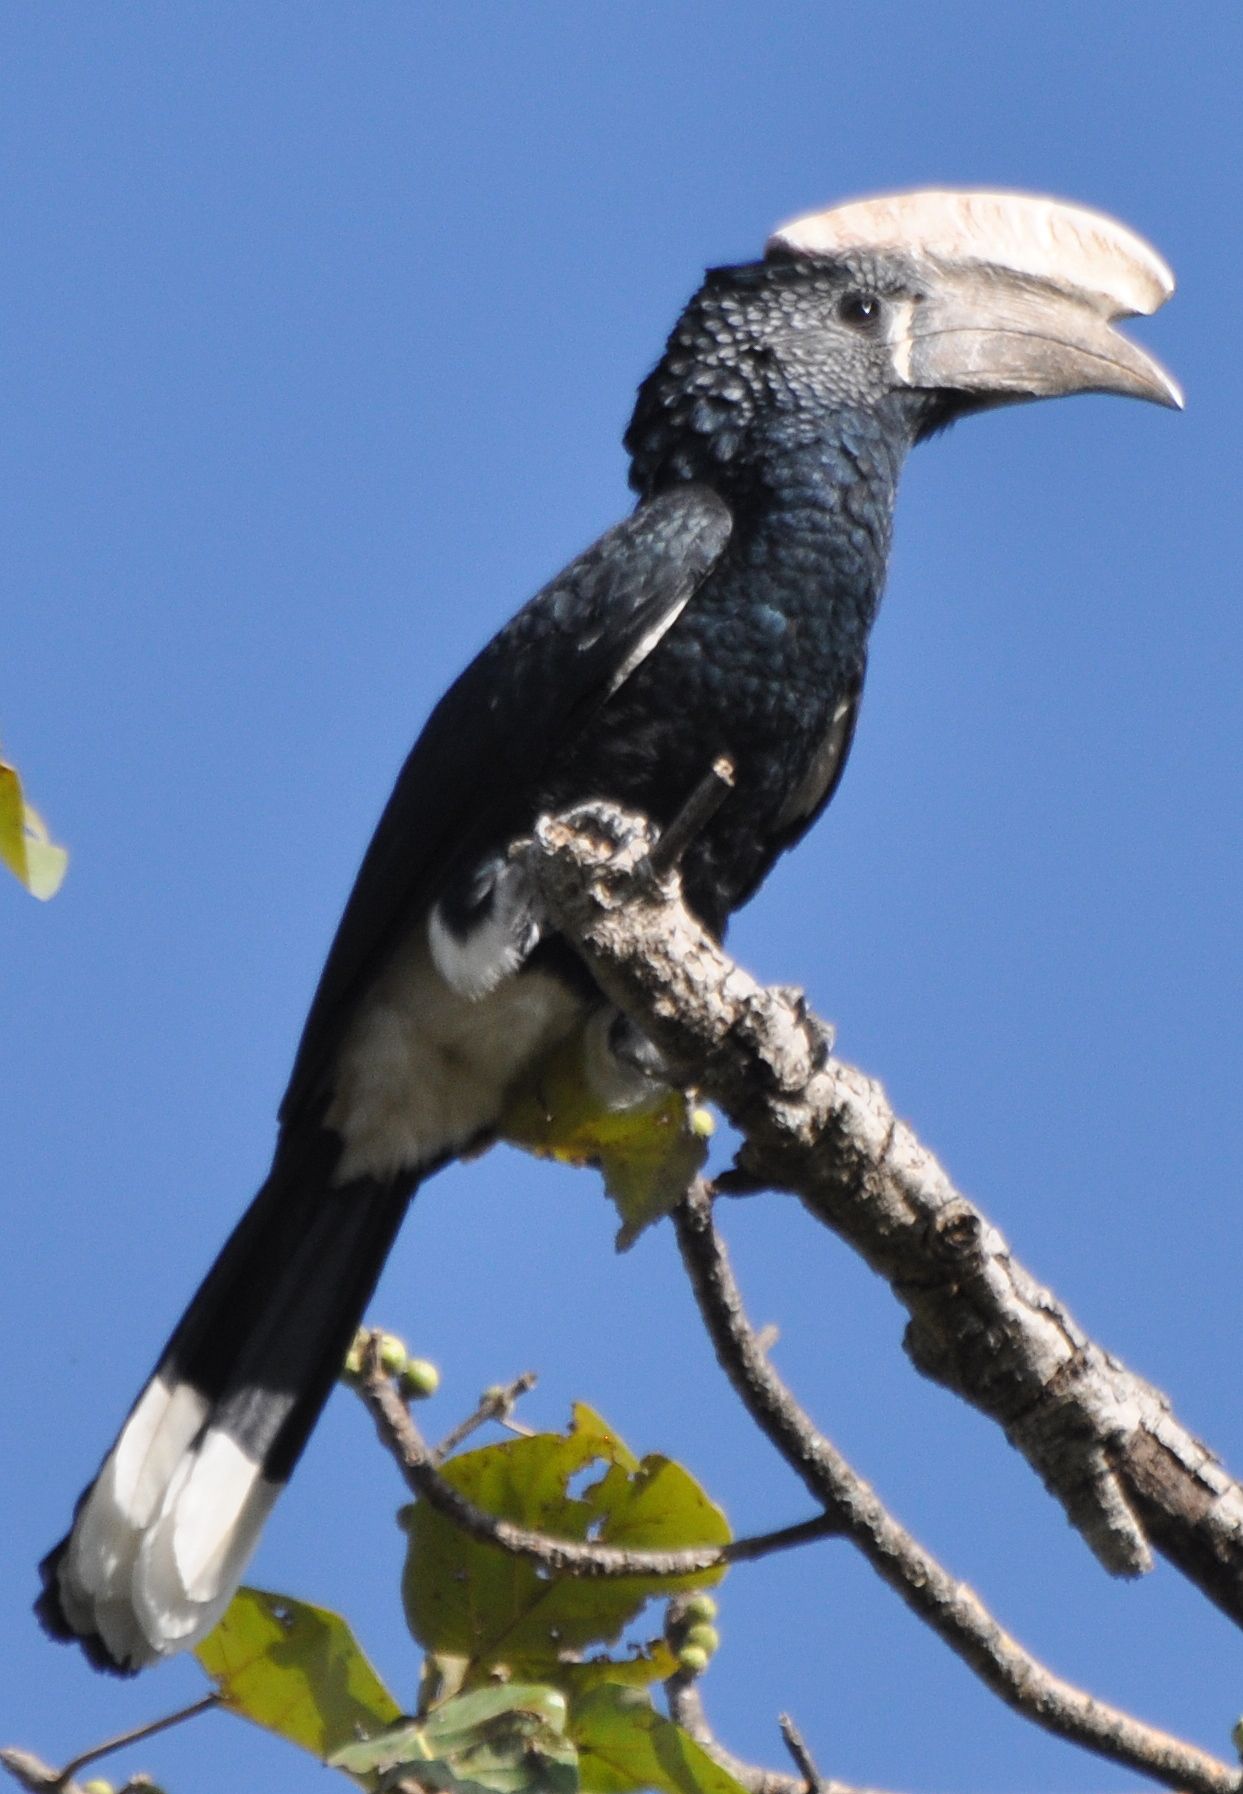 Image of Silvery-cheeked Hornbill